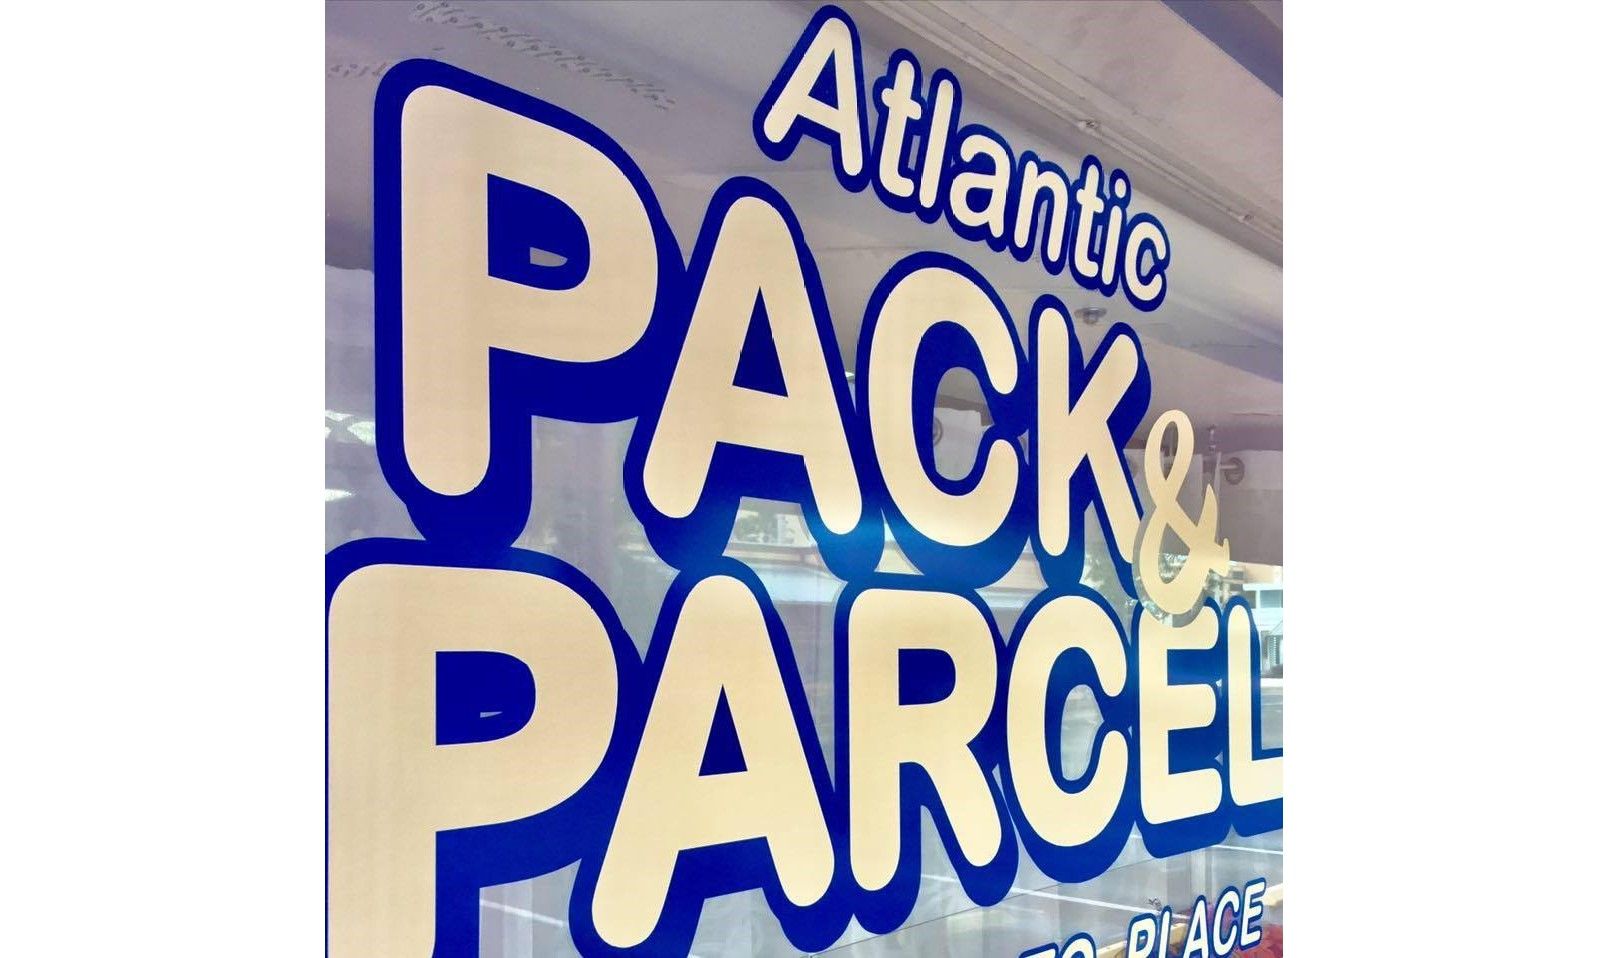 Your Go-to Place for Packing - ATLANTIC PACK N PARCEL